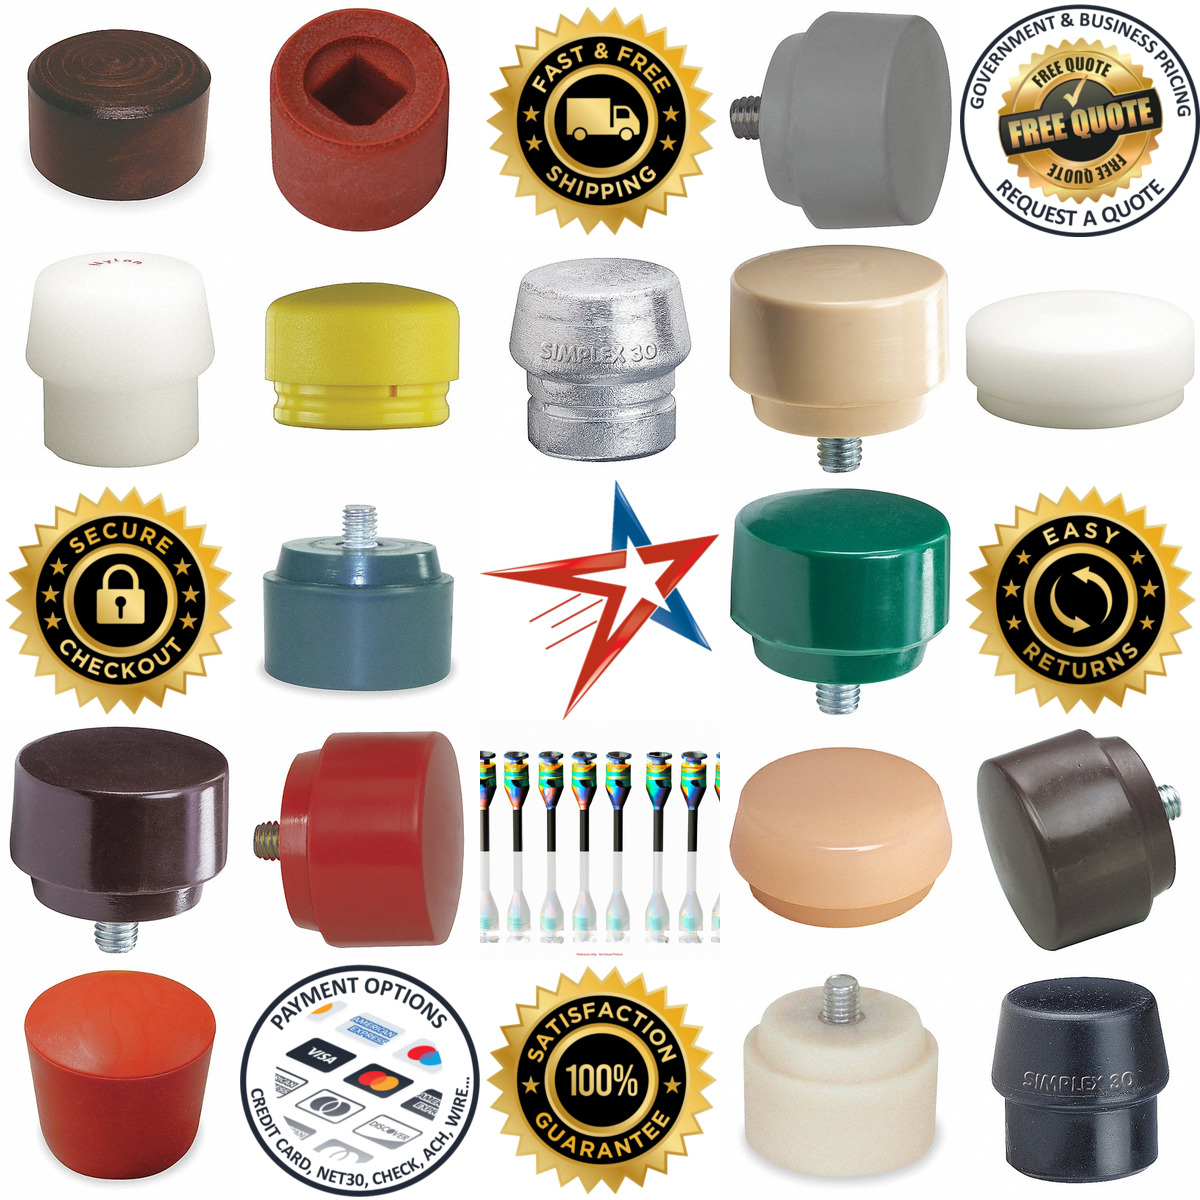 A selection of Interchangeable Tips Heads products on GoVets